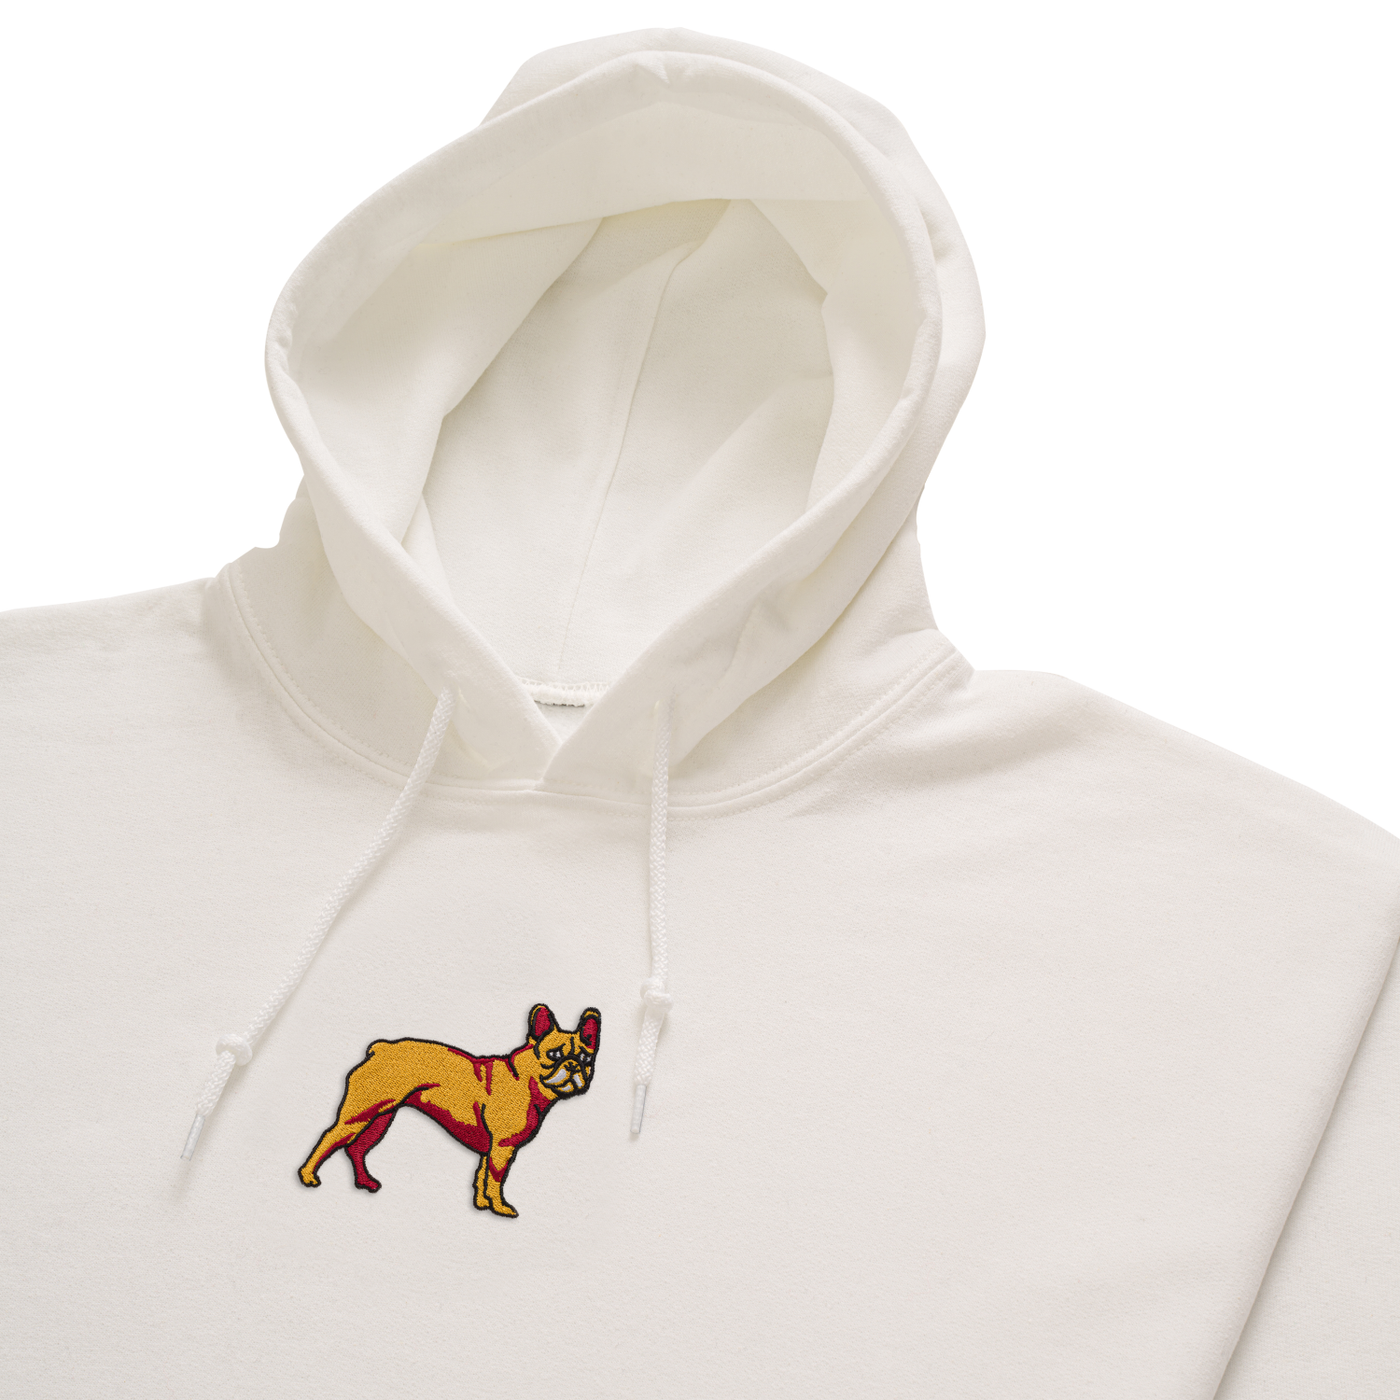 Bobby's Planet Women's Embroidered French Bulldog Hoodie from Paws Dog Cat Animals Collection in White Color#color_white